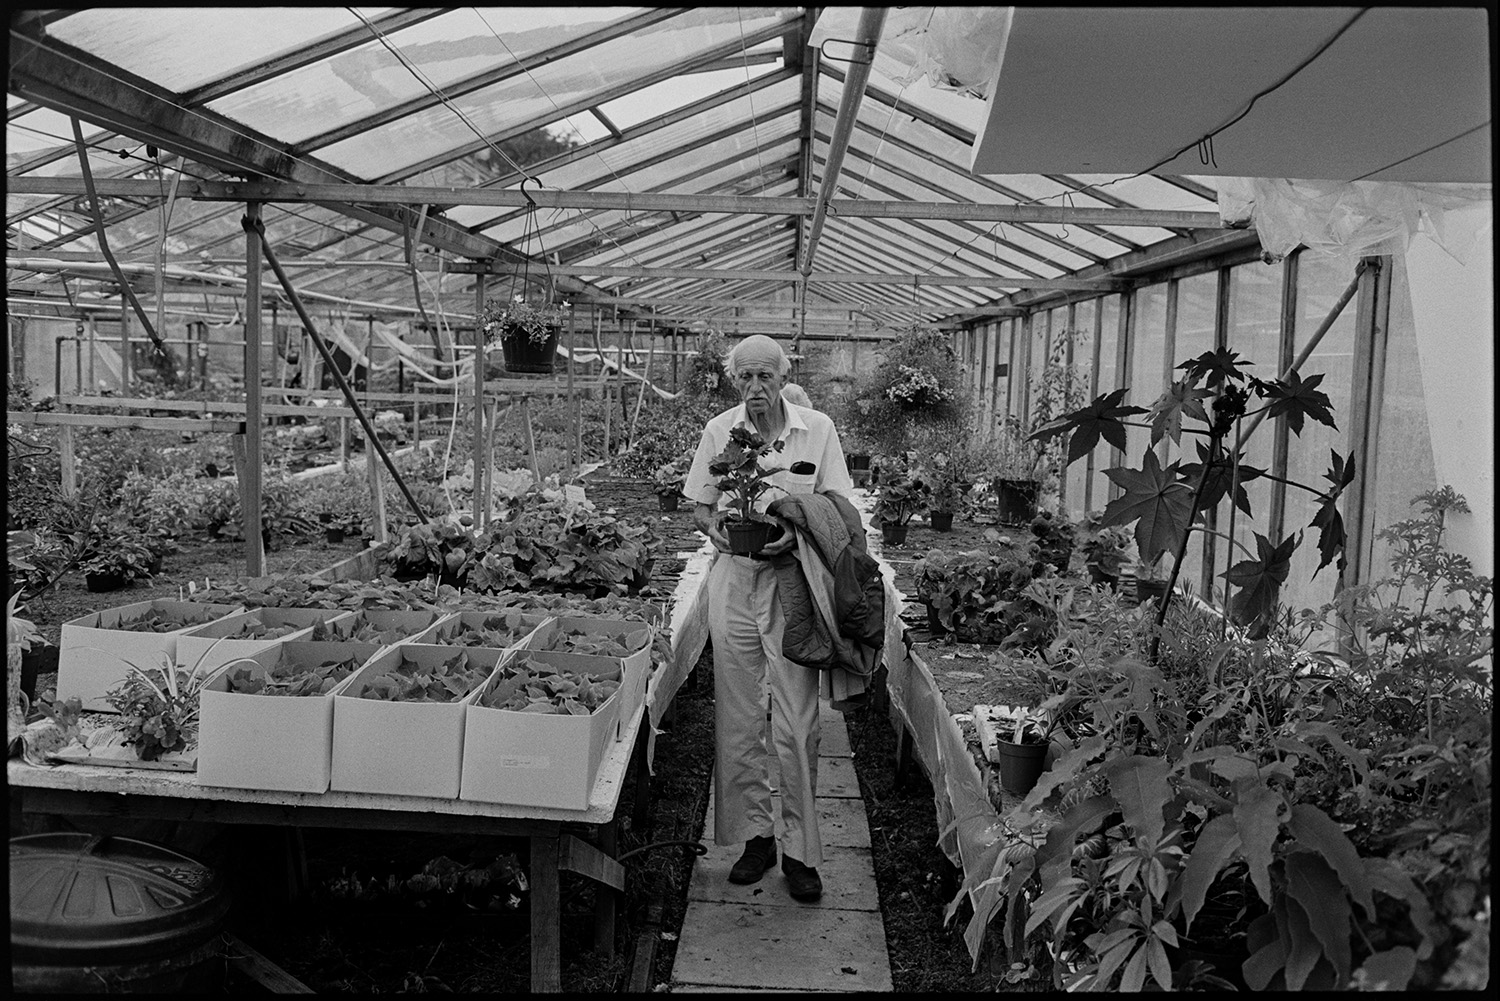 Man working in garden centre, potting plants in greenhouse.
[Man carrying a potted plant, inside a greenhouse at Eggesford Garden Centre. Benches with plants, boxes and an irrigation system are visible in the greenhouse.]